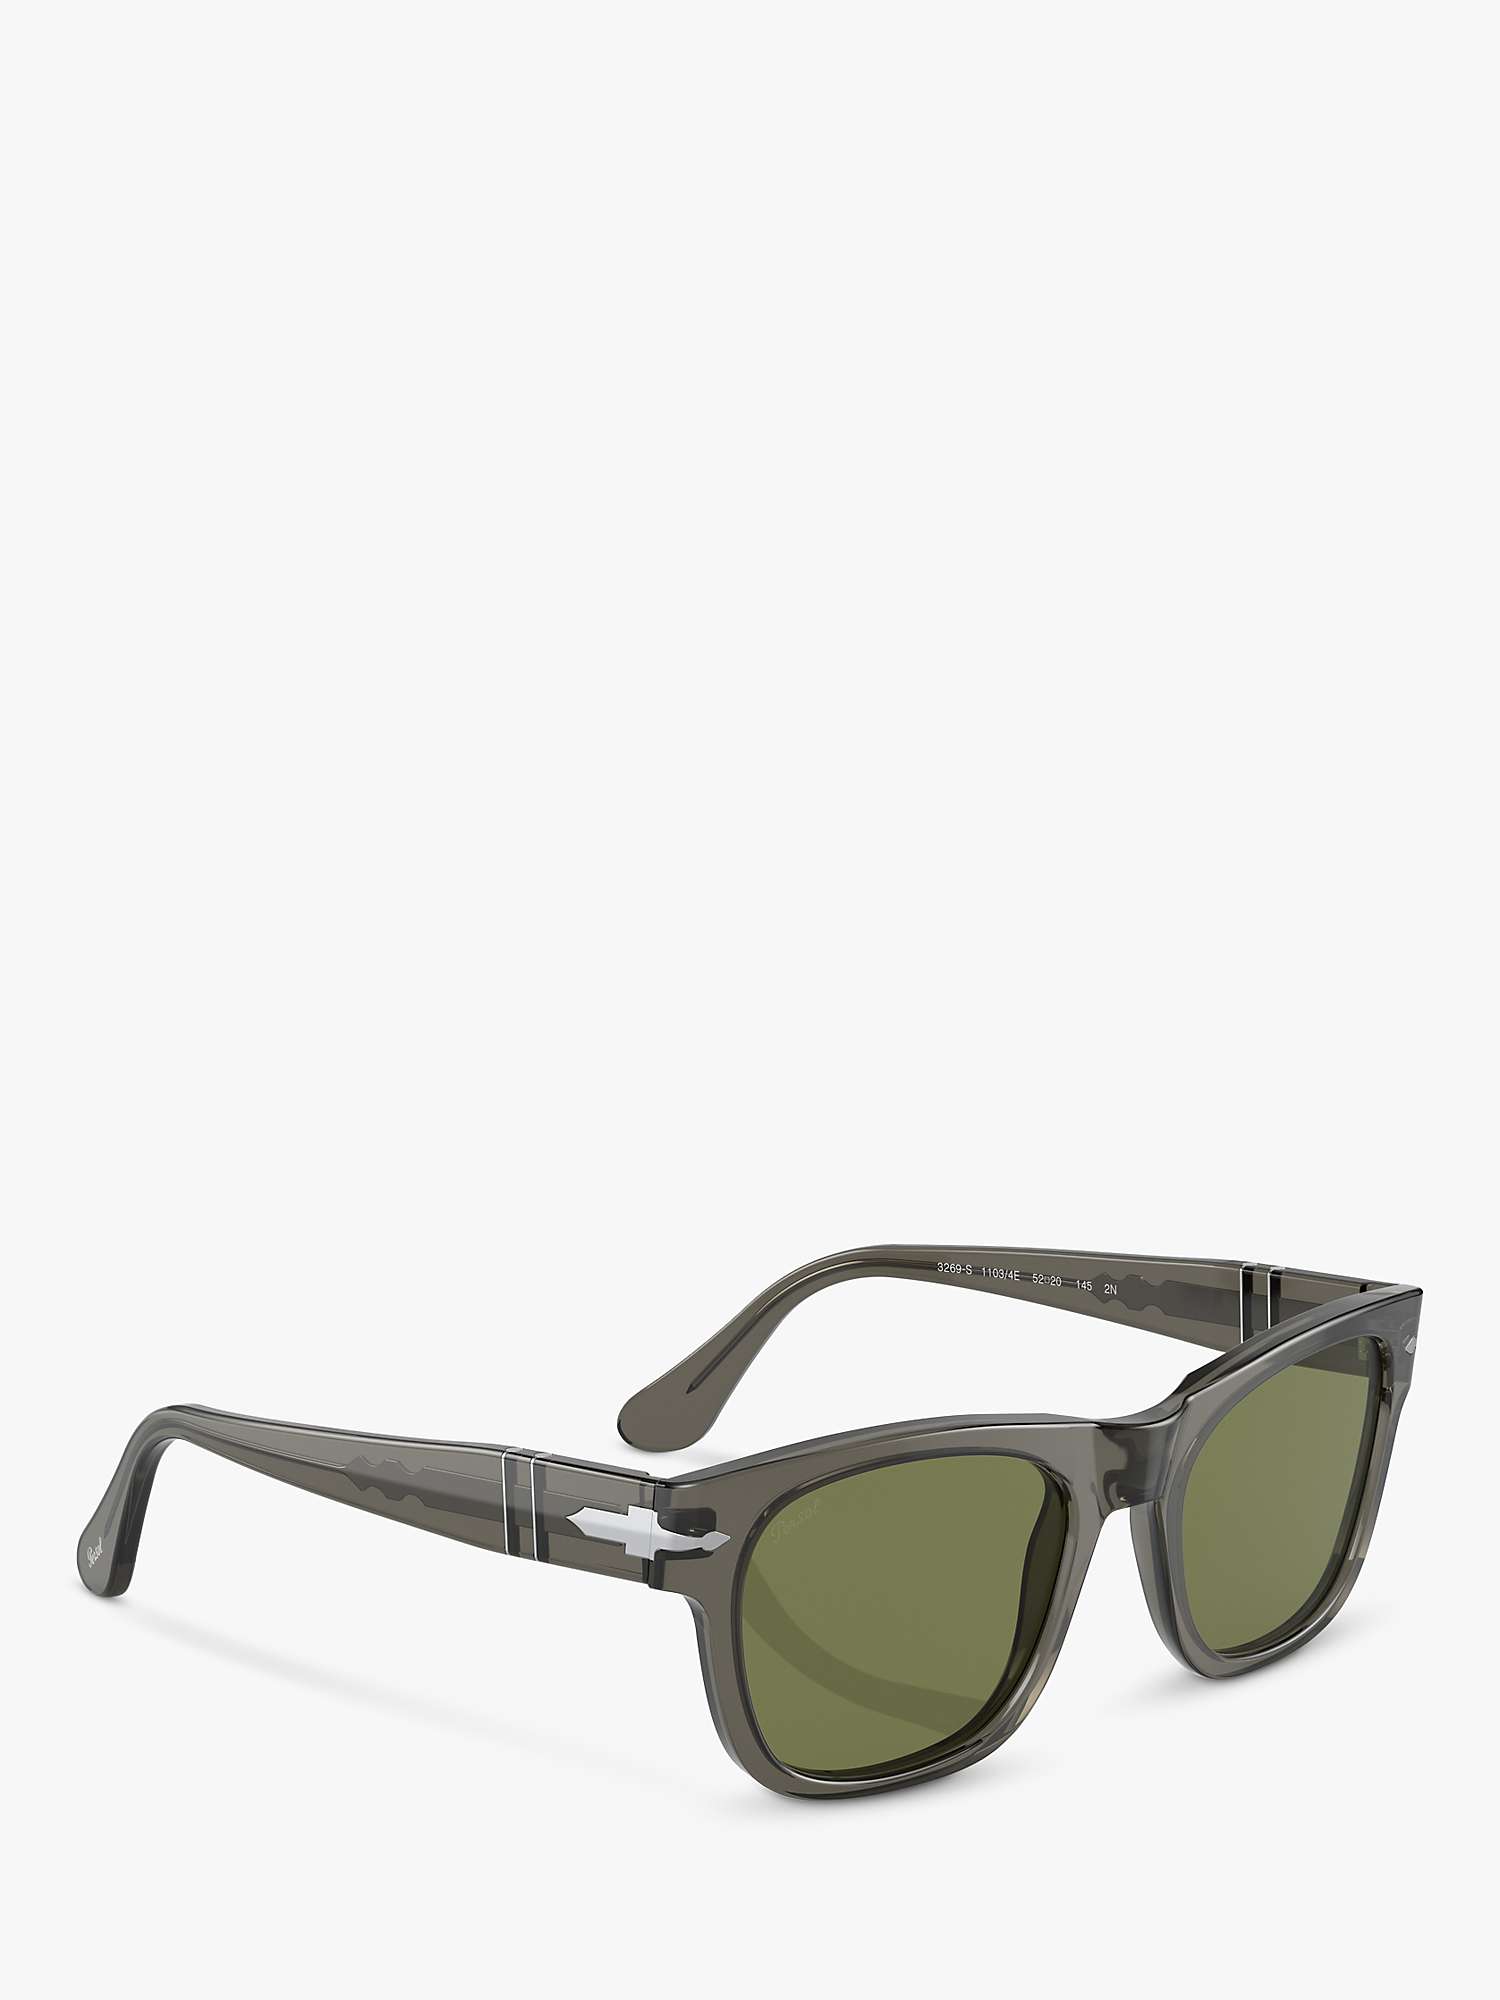 Buy Persol PO3269S Unisex D-Frame Sunglasses, Opal Smoke/Green Online at johnlewis.com